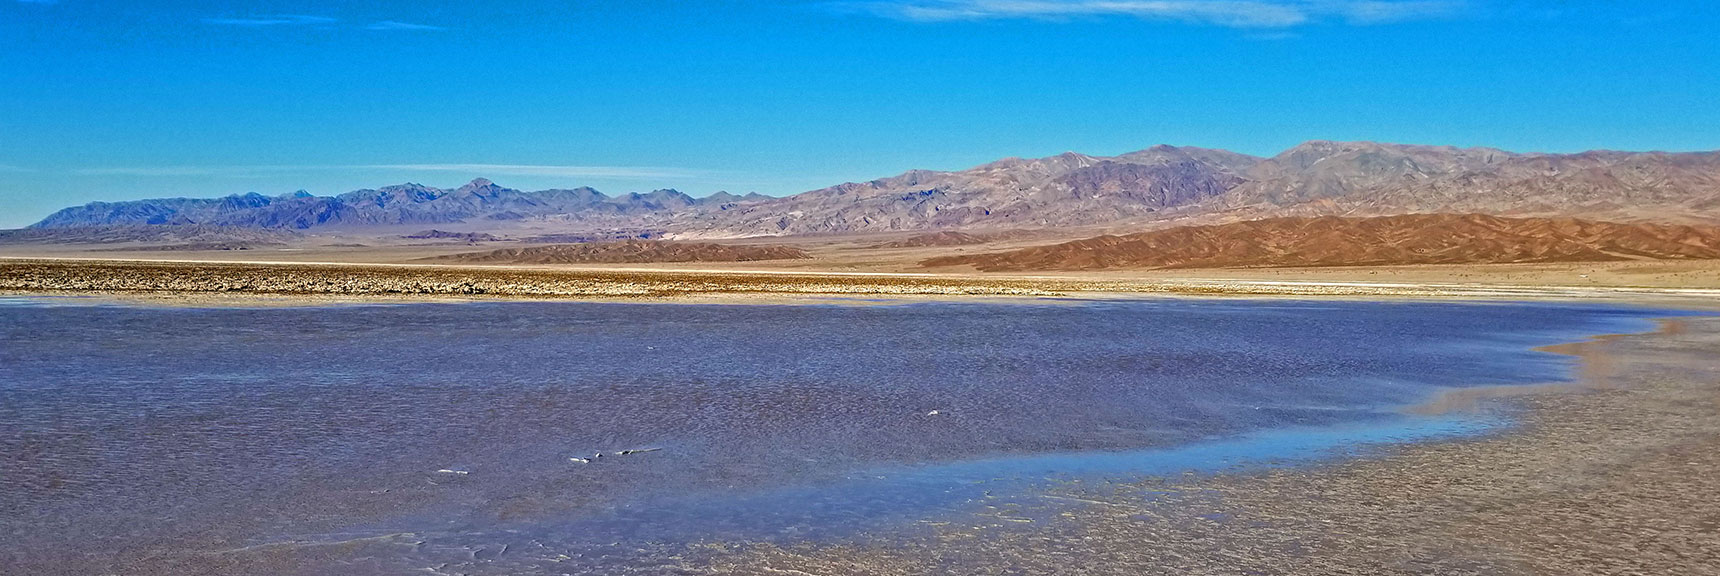 At the Lake Shore Looking Southeast Toward Daylight Pass Area. | Return of Lake Manly (Lake in Death Valley) | Death Valley National Park, California